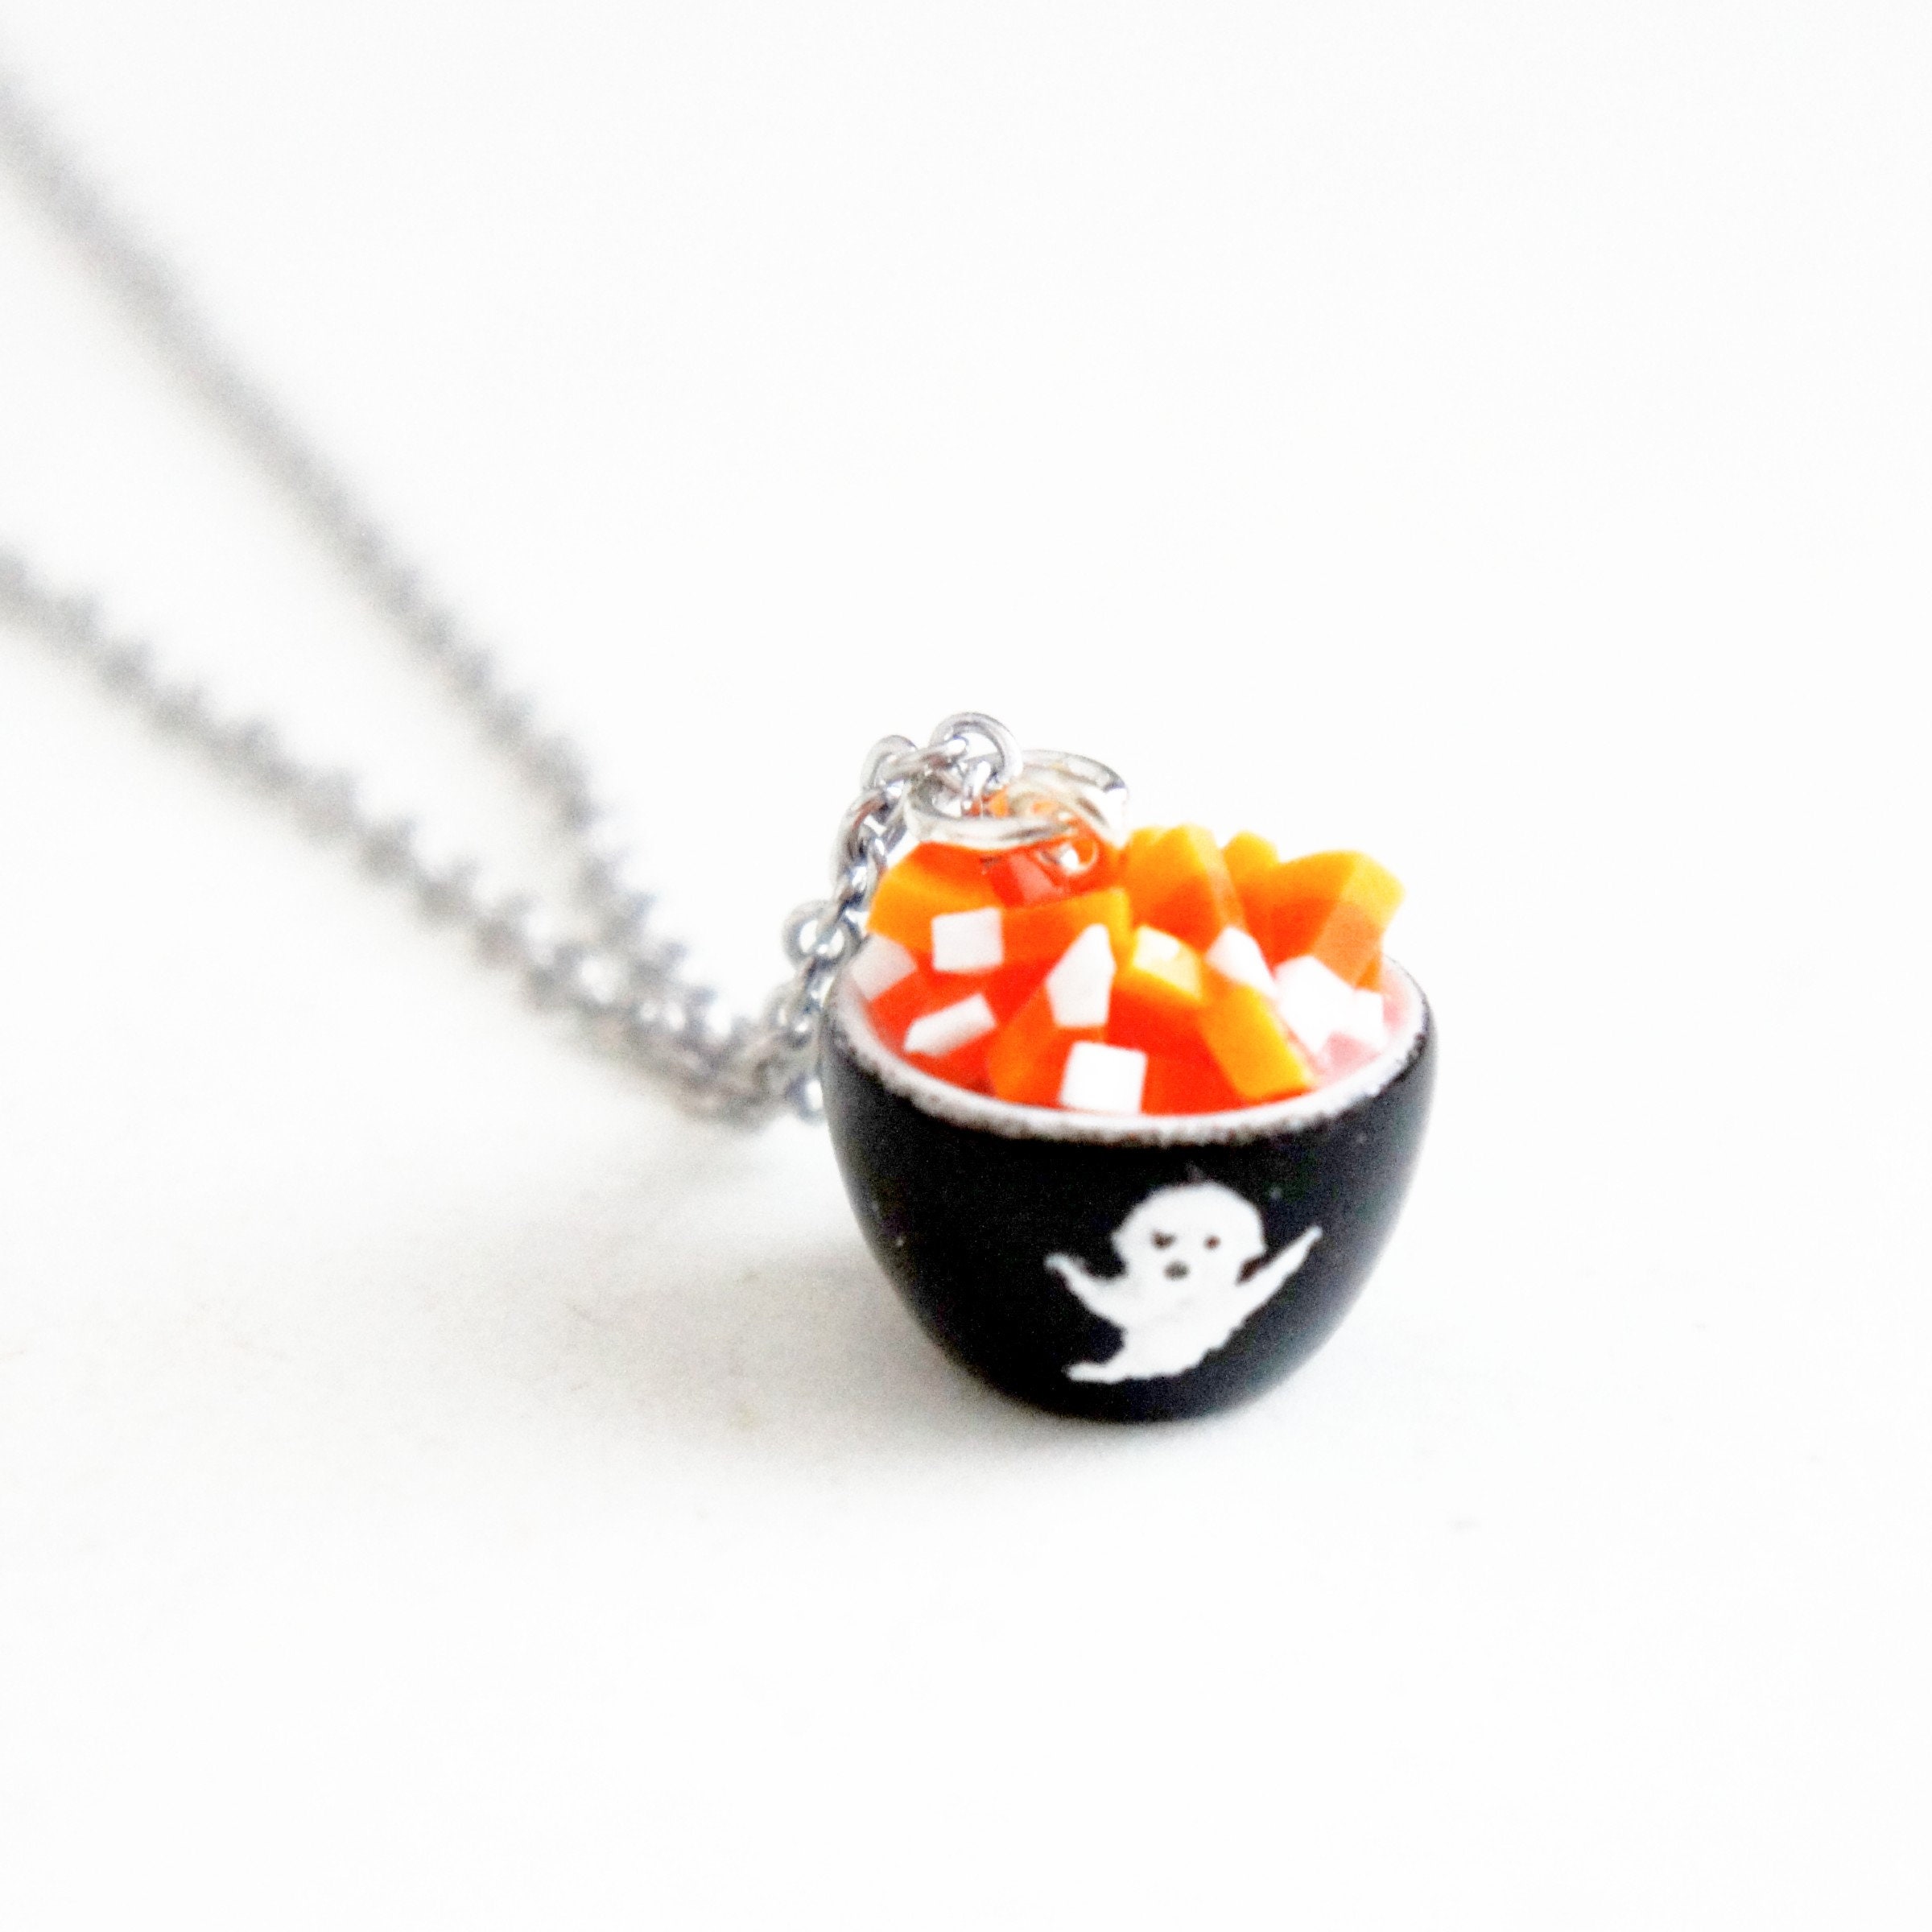 Candy Corn Glass Bead Glitter Resin Pendant Necklace Stainless Candy Corn  Halloween Necklace Epoxy Resin Art Pendant Candy Corn Jewelry Gift - Etsy | Candy  corn jewelry, Candy corn, Resin pendant necklace